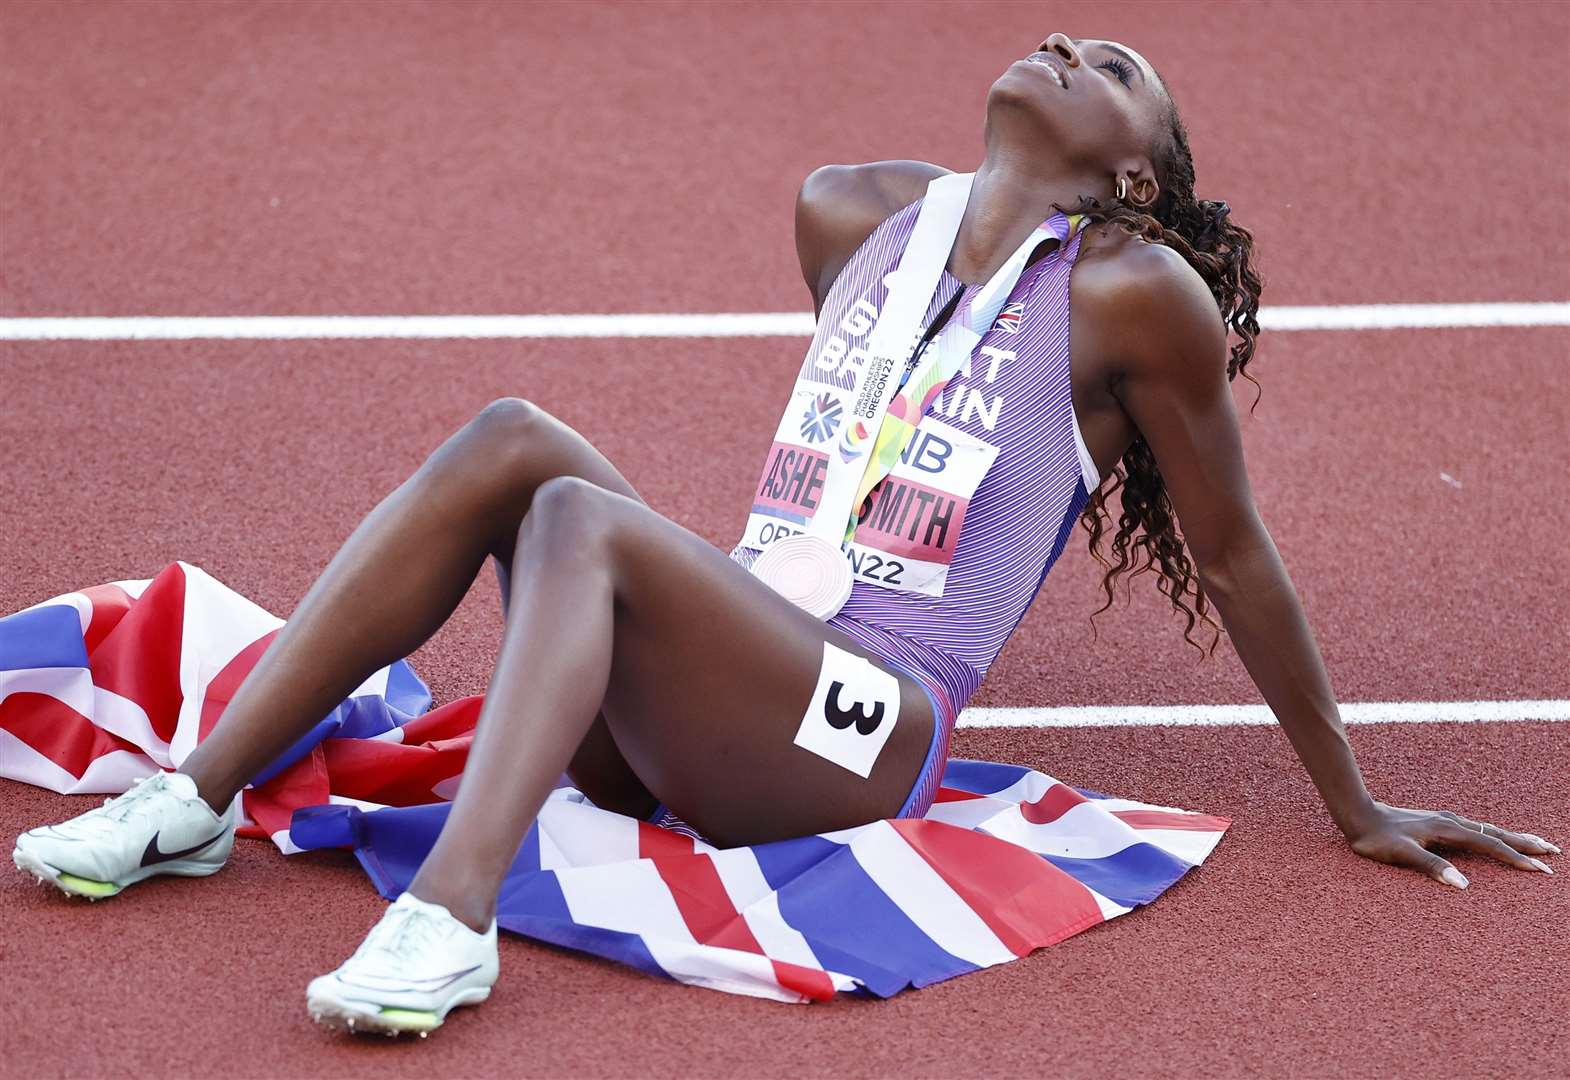 Orpington's Dina Asher-Smith will try to bounce back from Commonwealth Games disappointment at the European Championships. Picture: Steph Chambers/Getty Images, courtesy of British Athletics